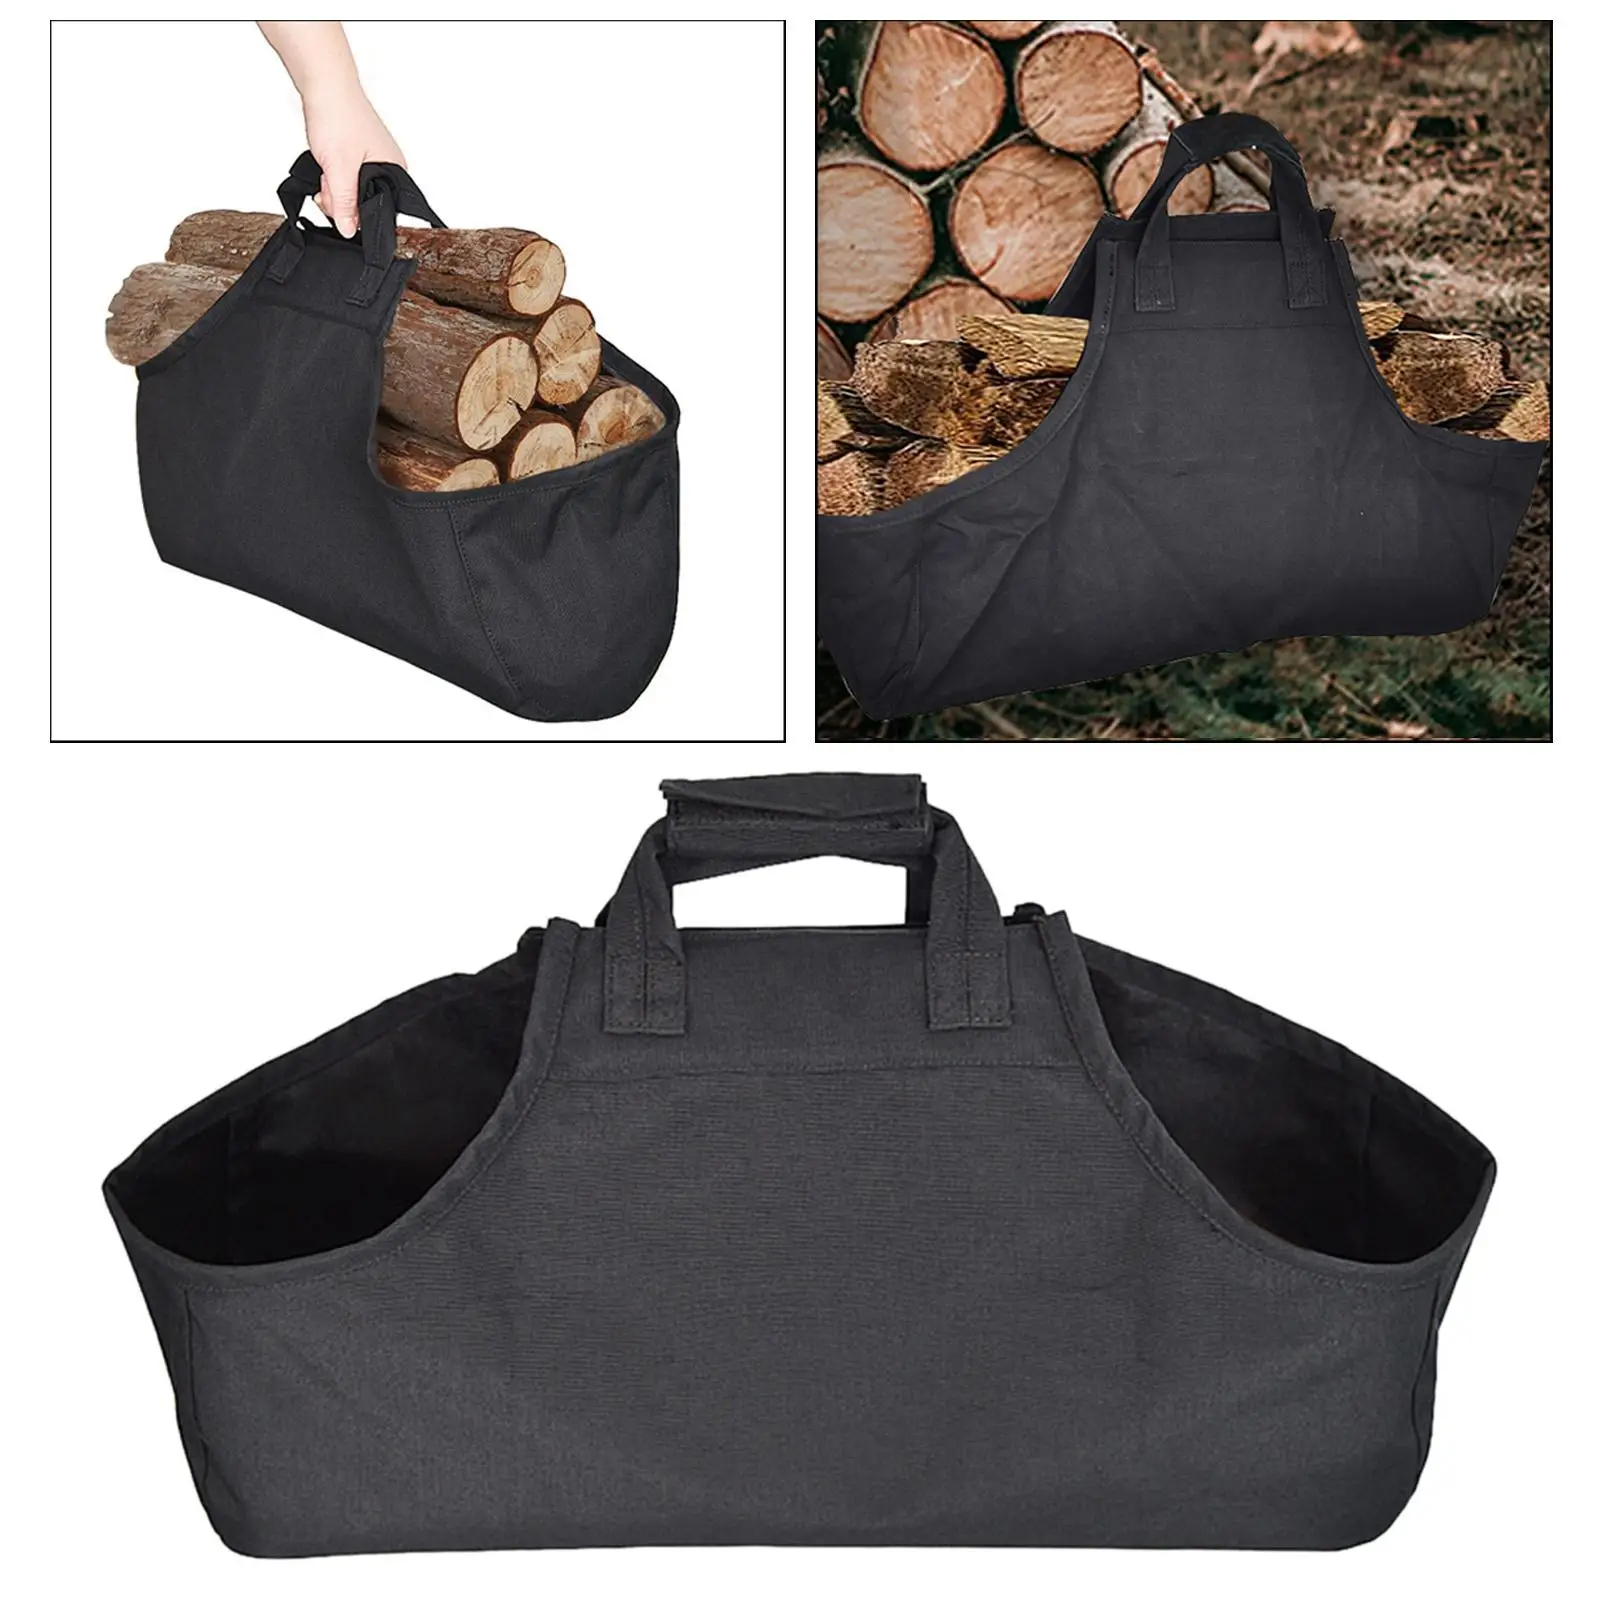 Large Capacity Firewood Carrier Bag Log Tote Fire Wood Holder with Handles Woodpile Rack Carrying for Fireplace Picnic